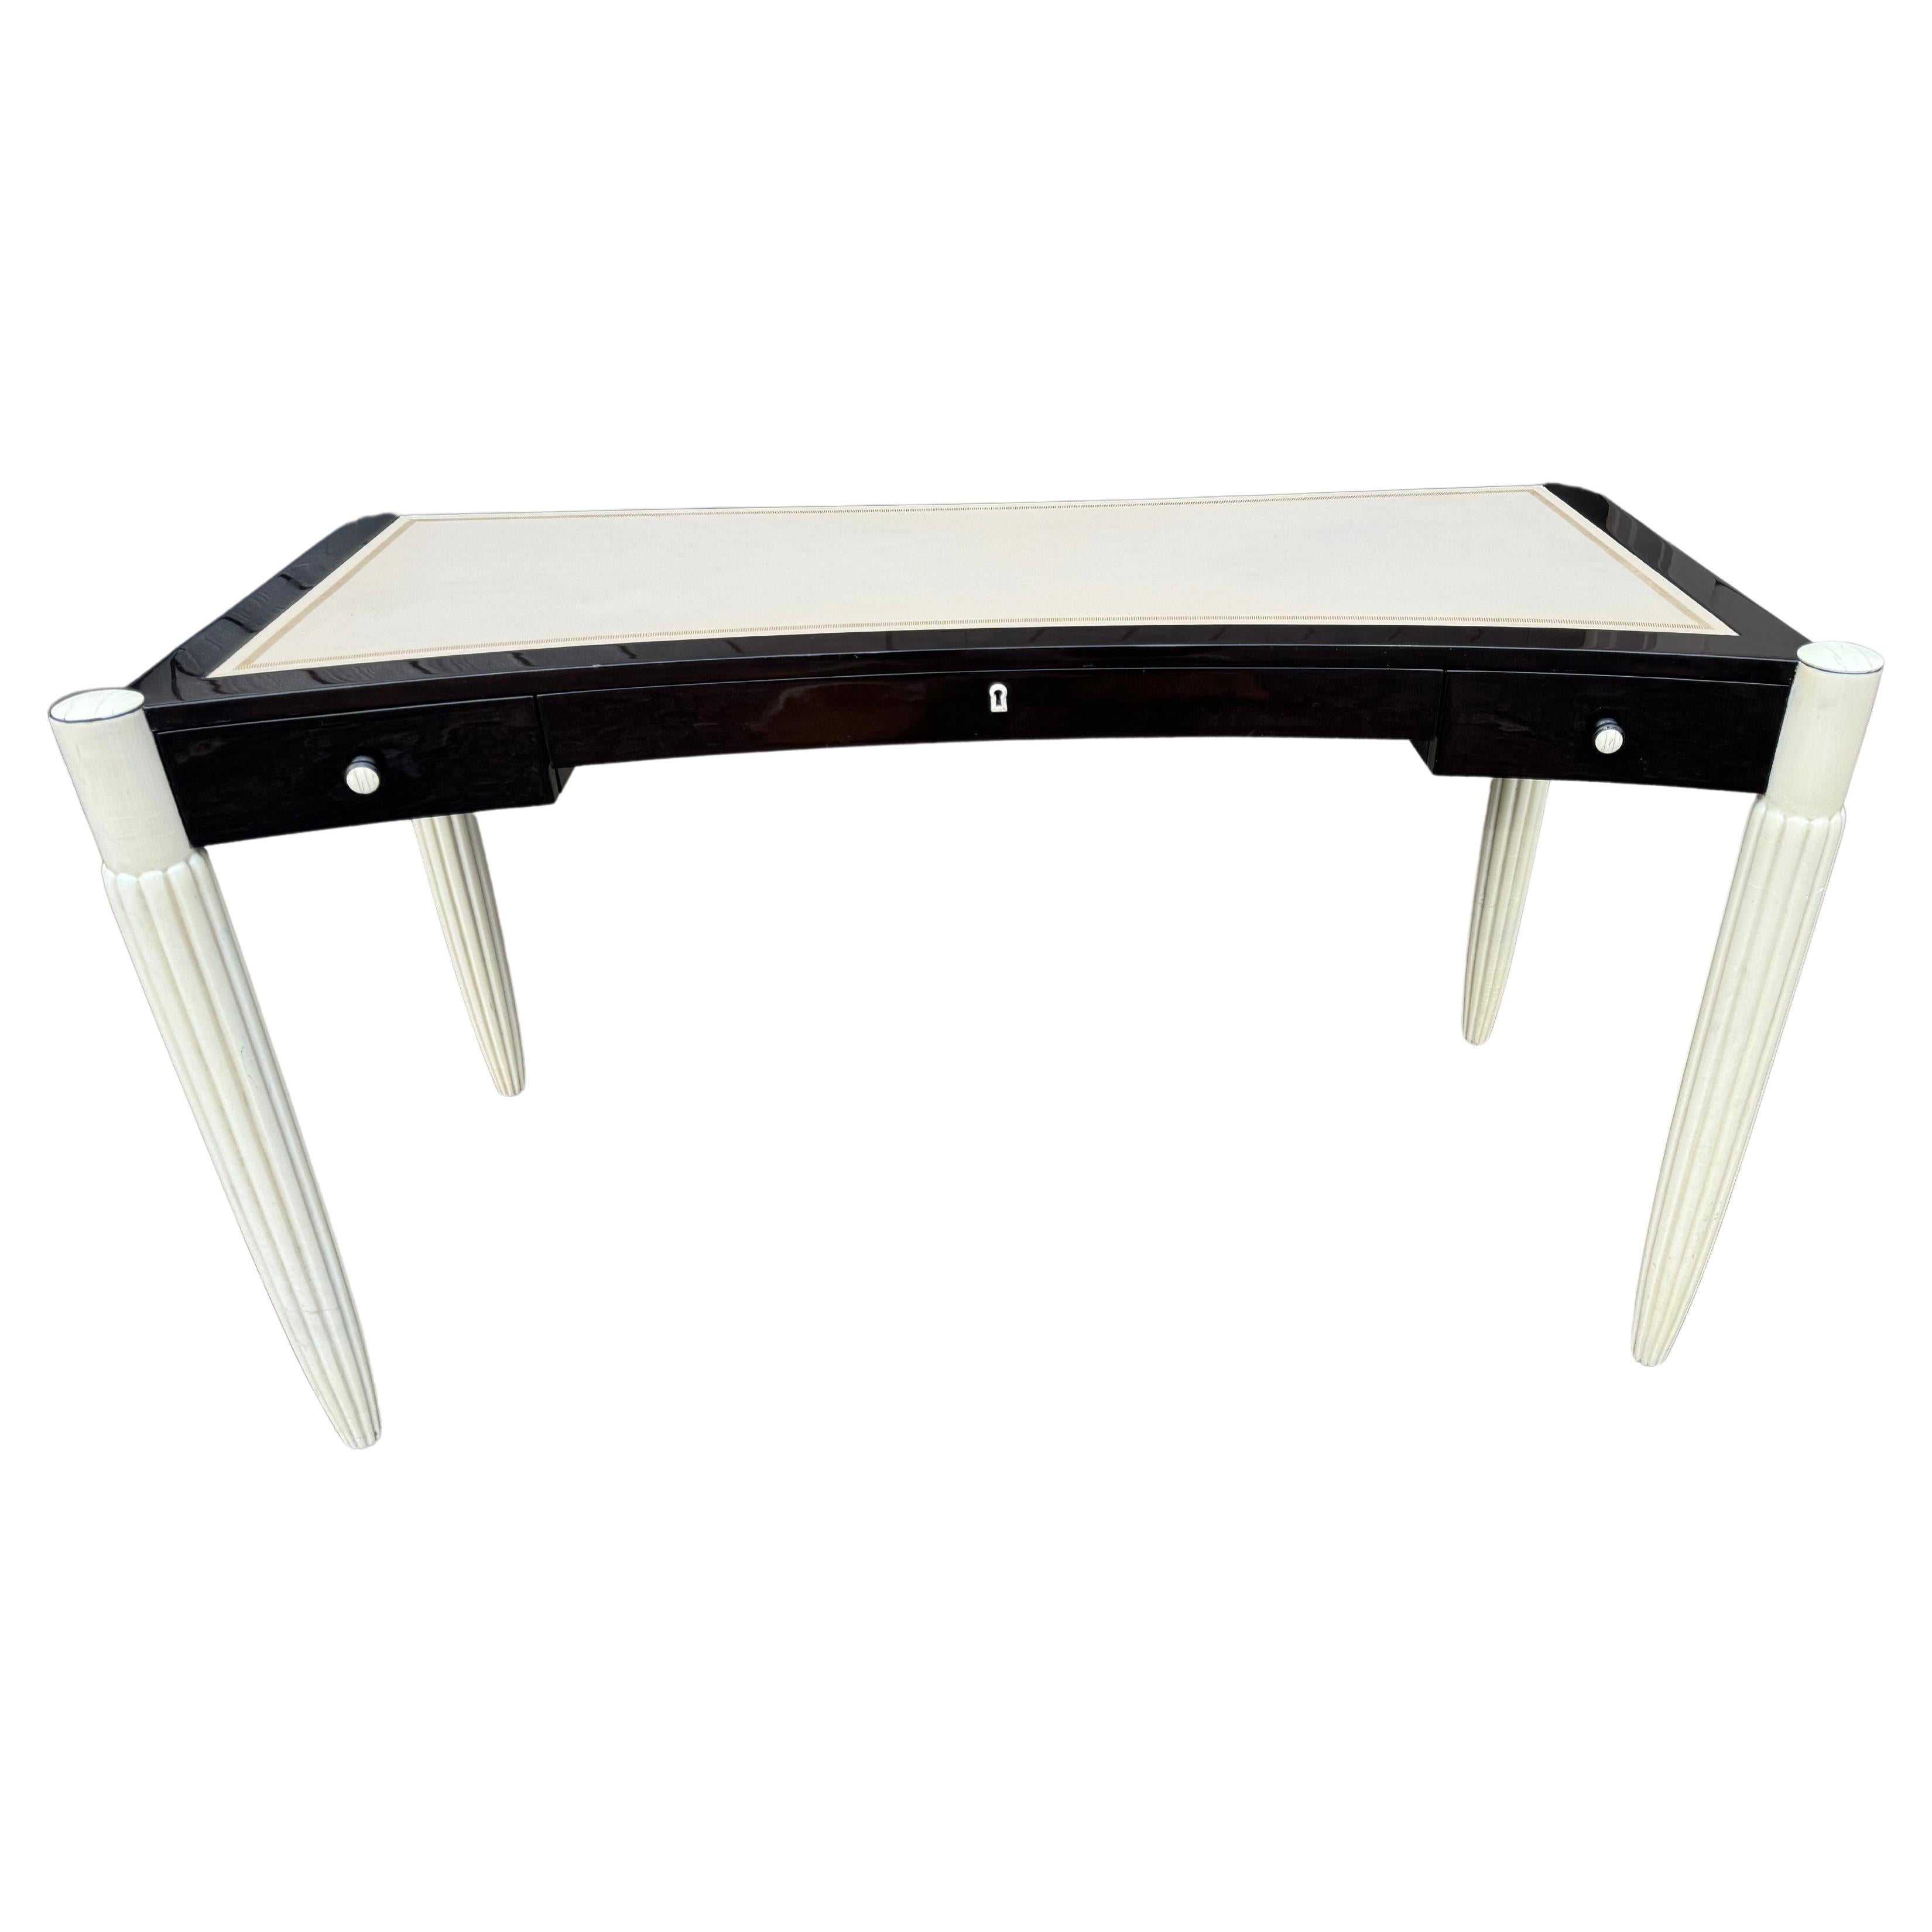 Glamorous Sally Sirkin Robert J Lewis Black & White Lacquer and Leather Desk For Sale